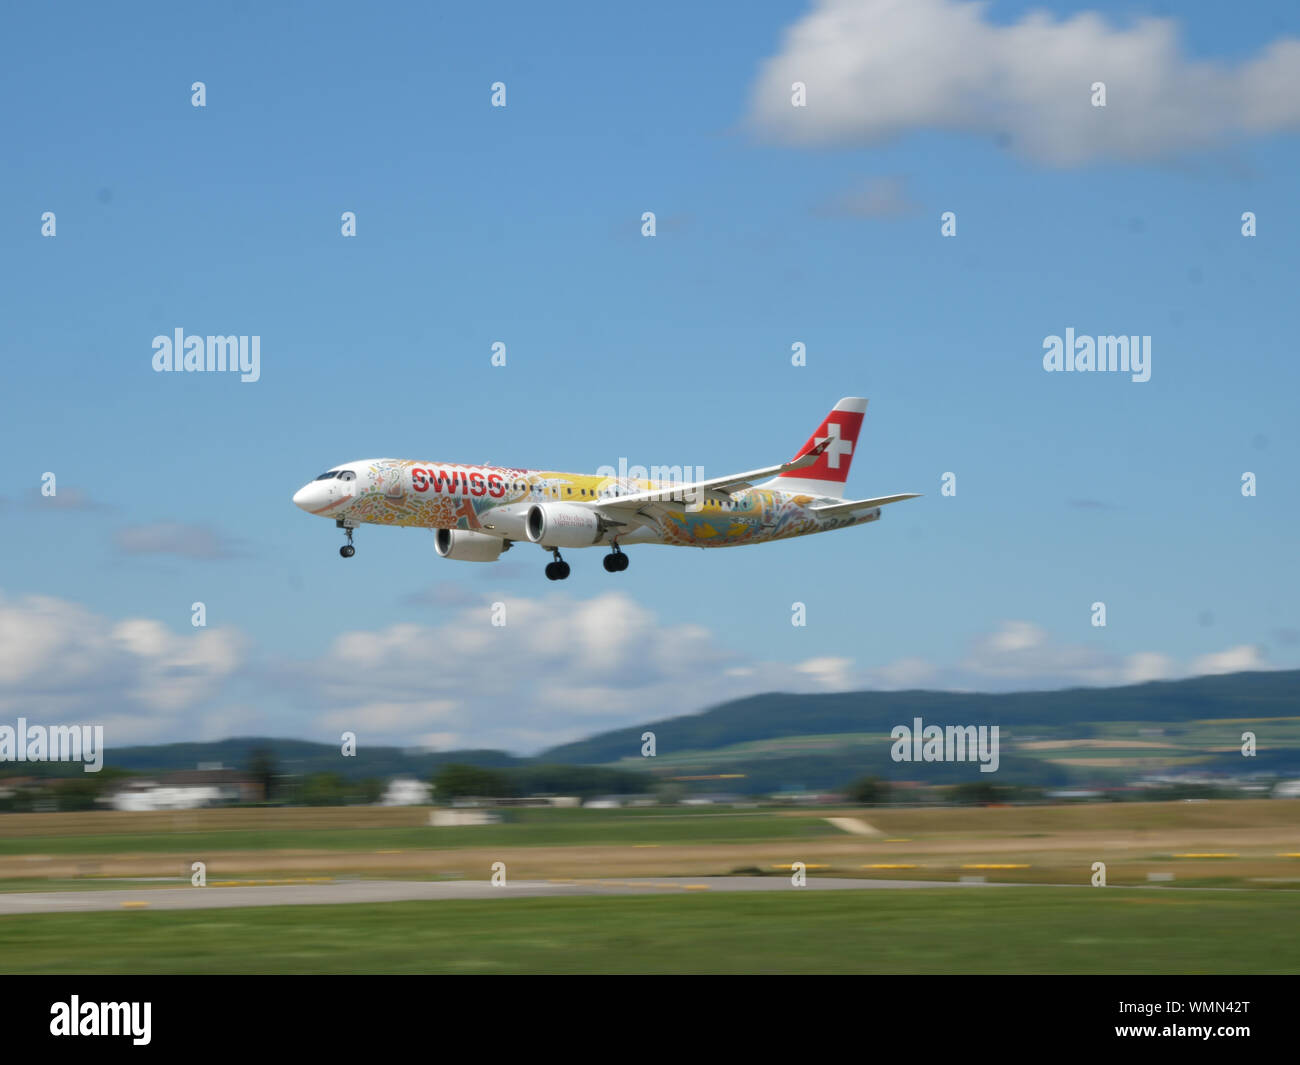 Fête des Vignerons livery of Swiss international airlines C-Series Stock Photo